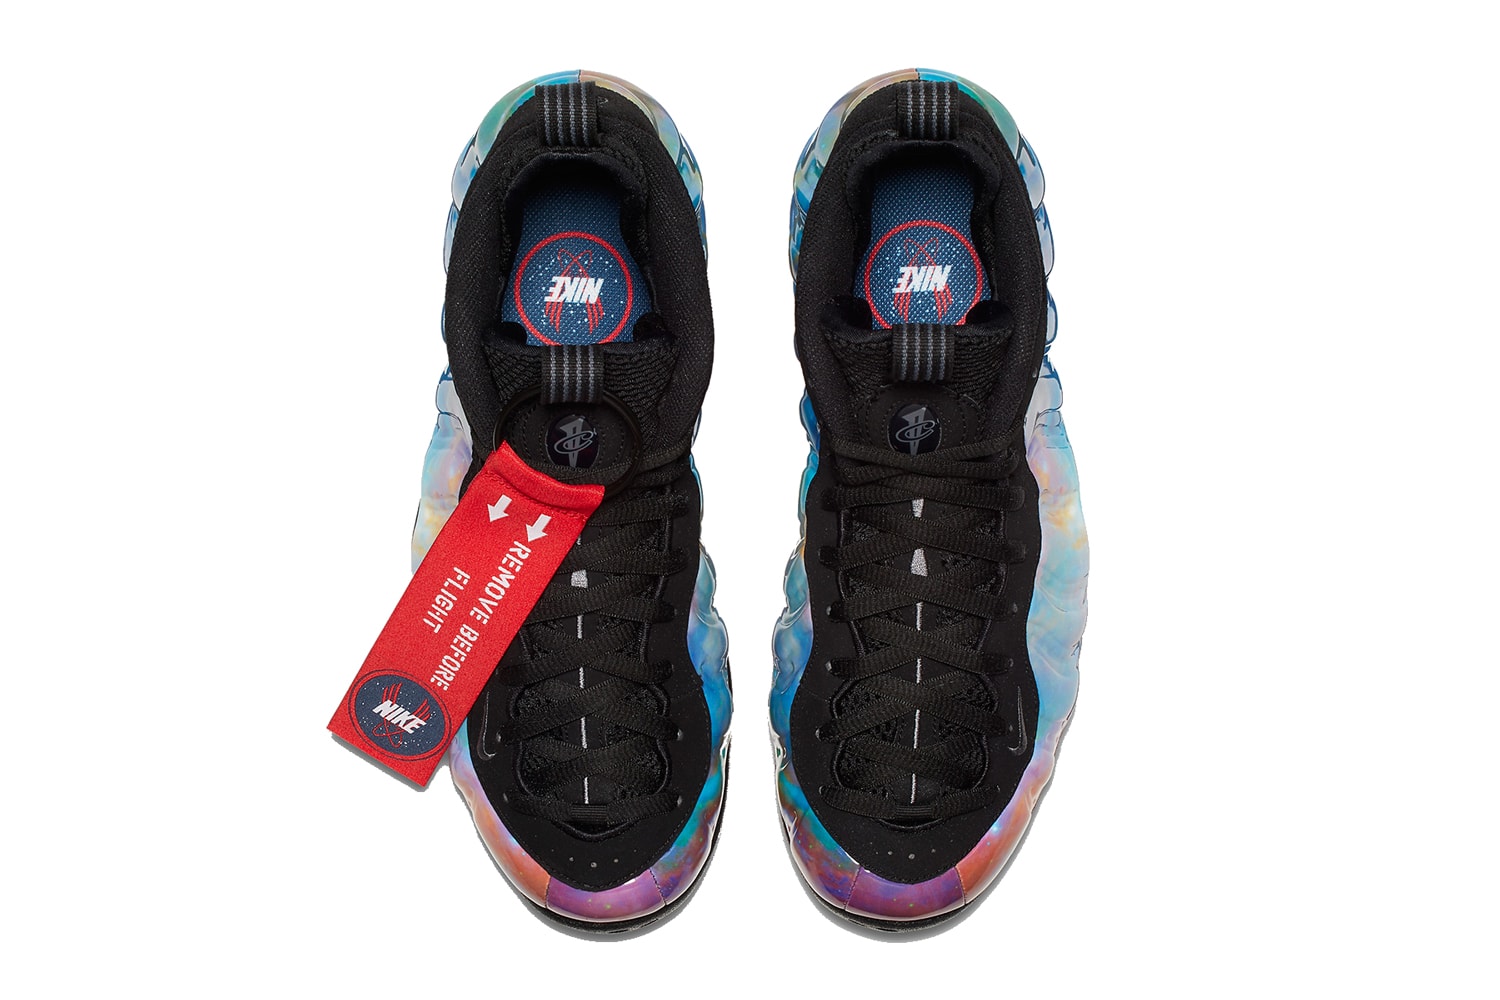 Nike Air Foamposite One Alternate Galaxy Nebula Official Images